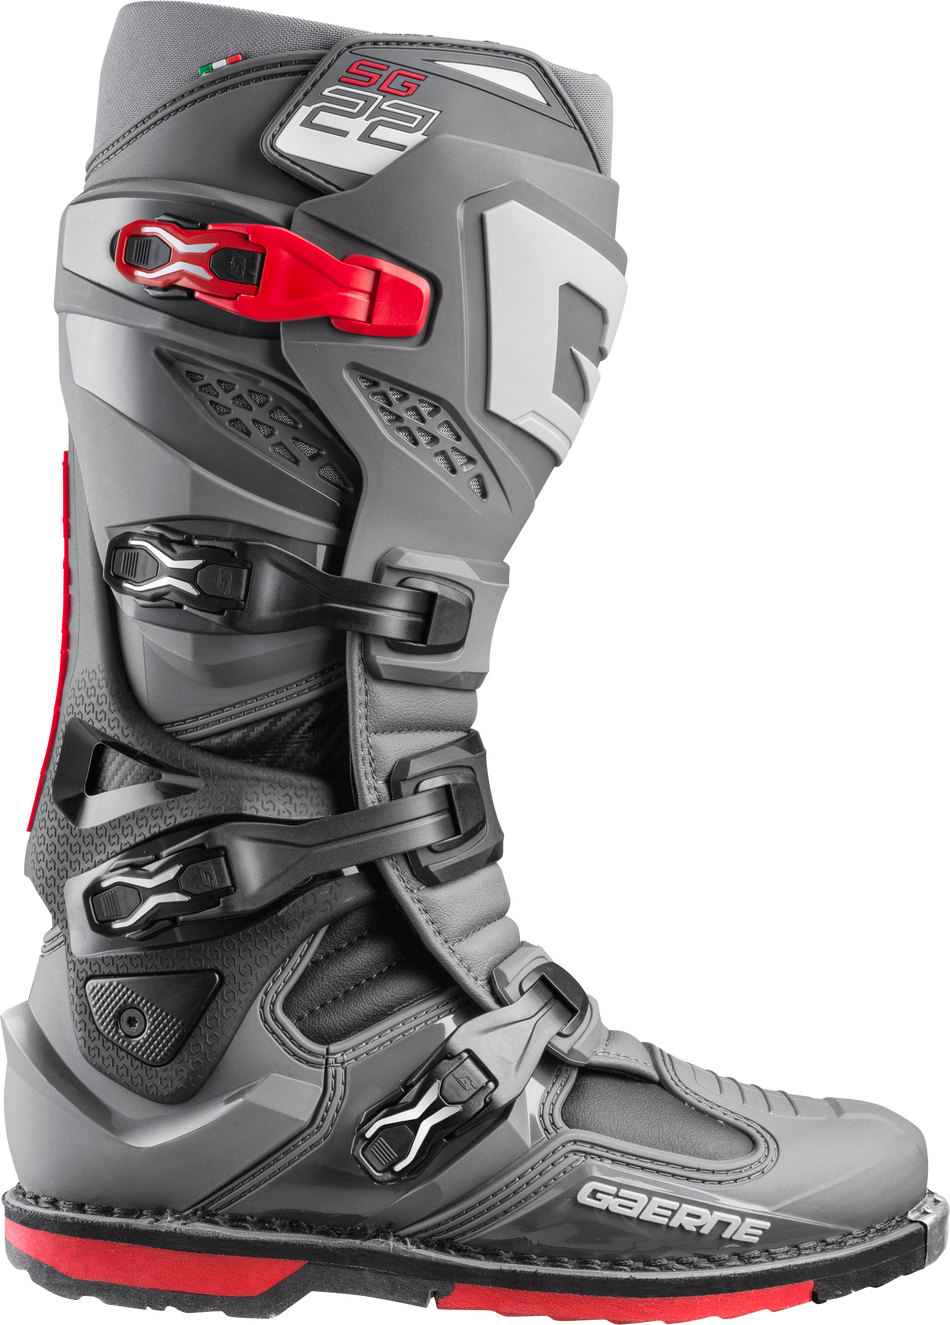 GAERNE Sg-22 Boots Anthracite/Black/Red Sz 12 2262-007-12